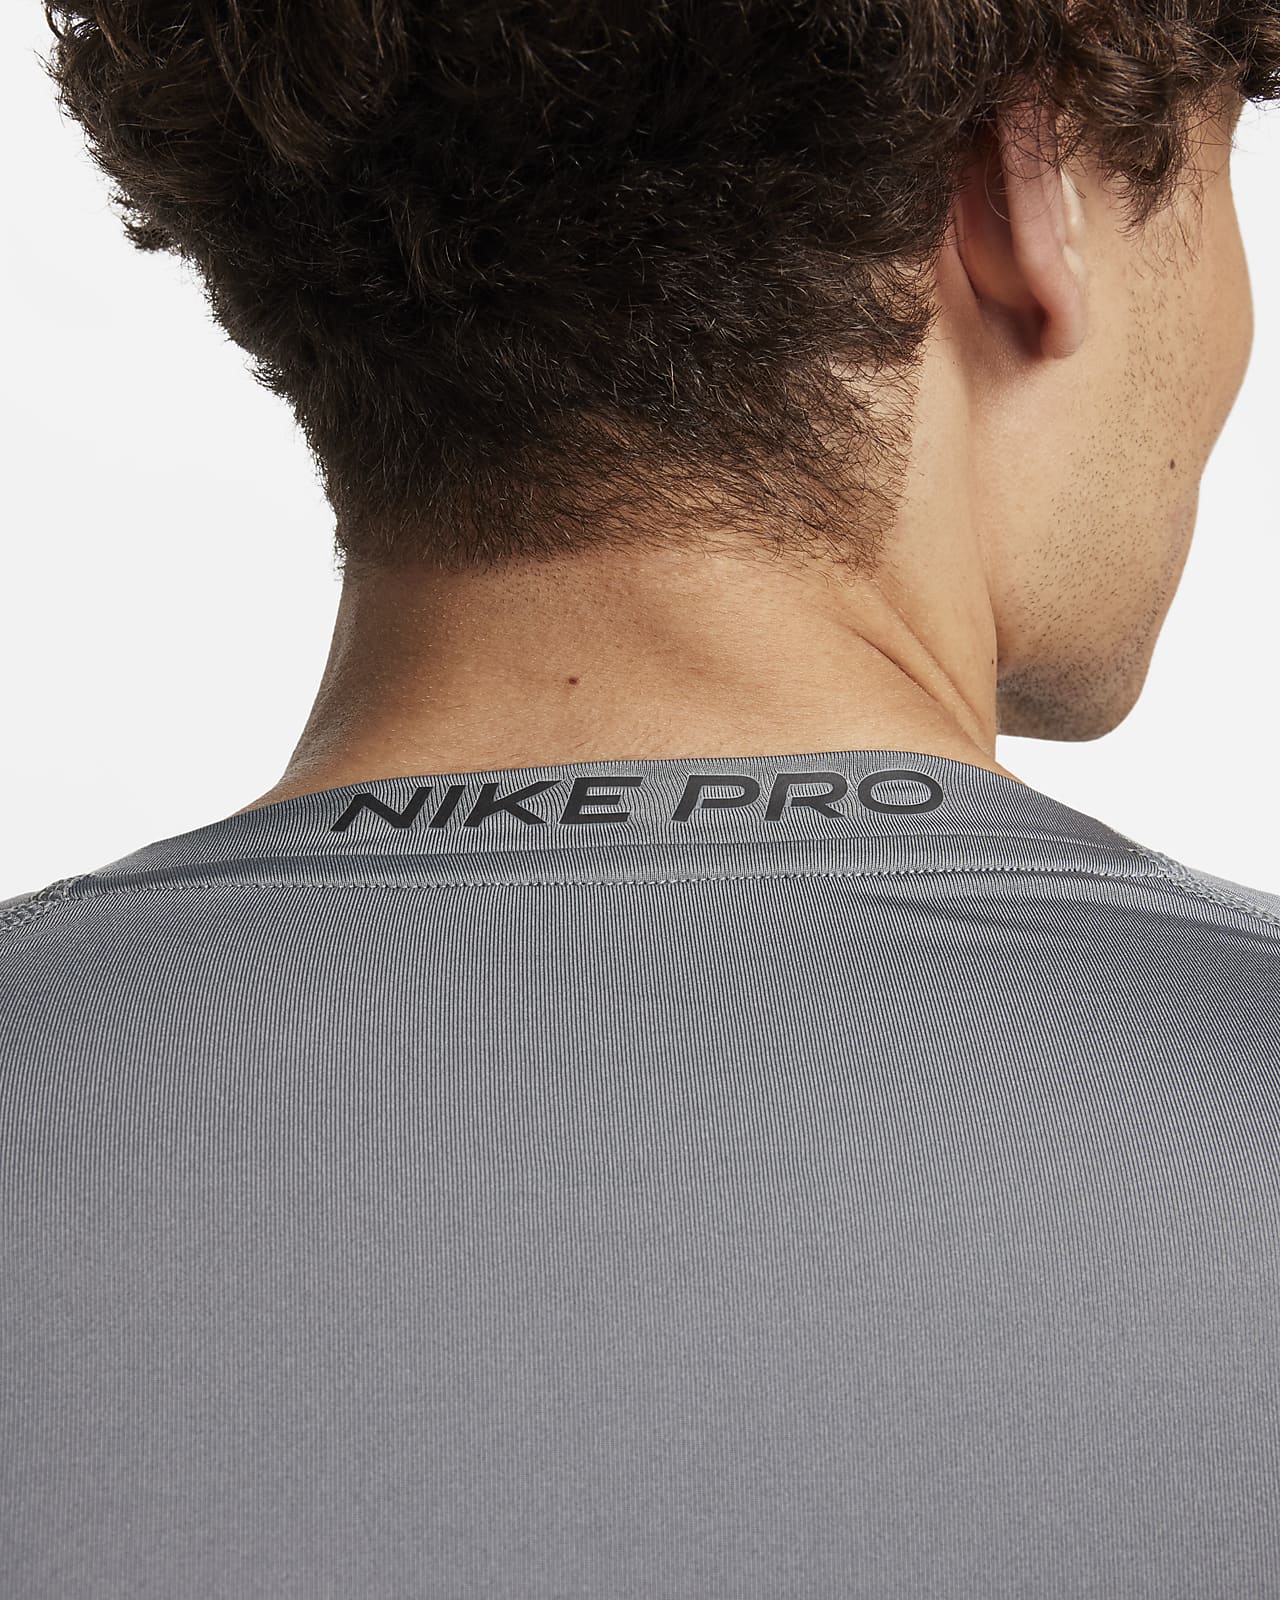  Nike Pro Mens Long Sleeve Slim Lightweight T-Shirts Top  BV5633-010 Size S Black/White : Clothing, Shoes & Jewelry